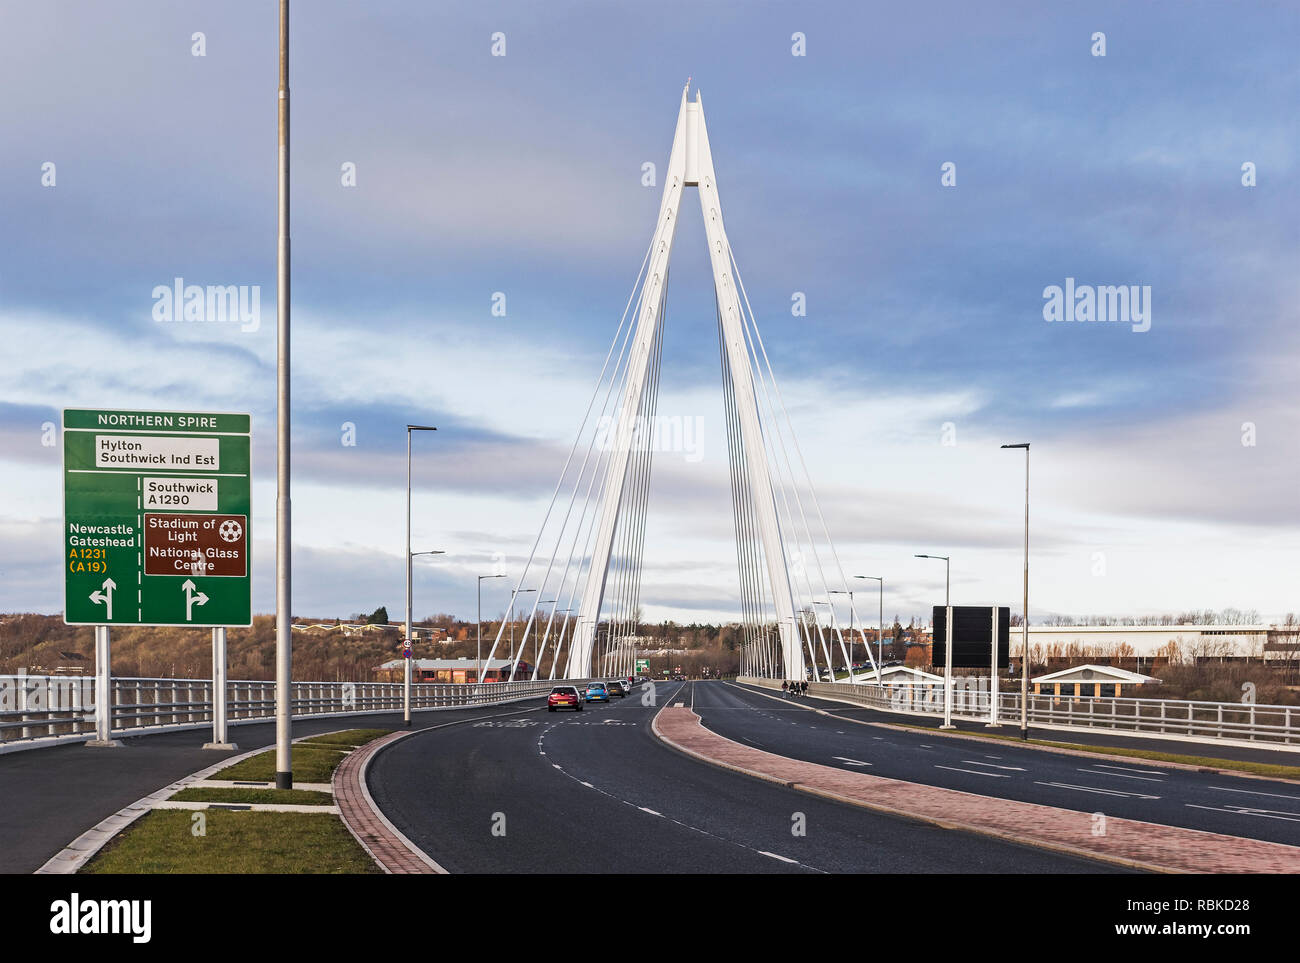 Northern Spire Bridge spans the river Wear, opened on 28th April 2018 at a cost of £117.6m. Stock Photo